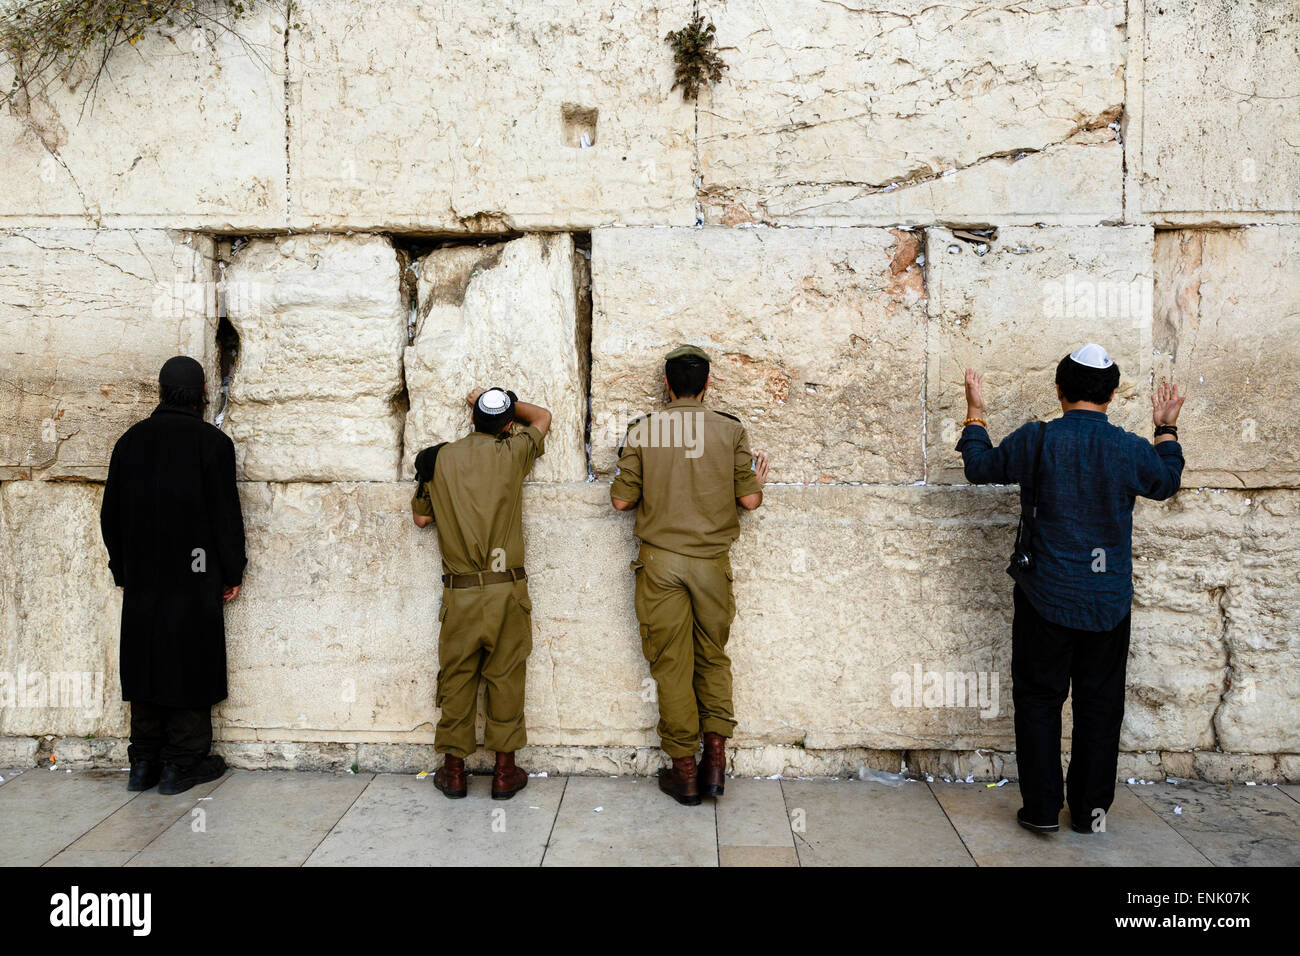 Jewish people praying at the Western Wall (Wailing Wall), UNESCO World Heritage Site, Jerusalem, Israel, Middle East Stock Photo